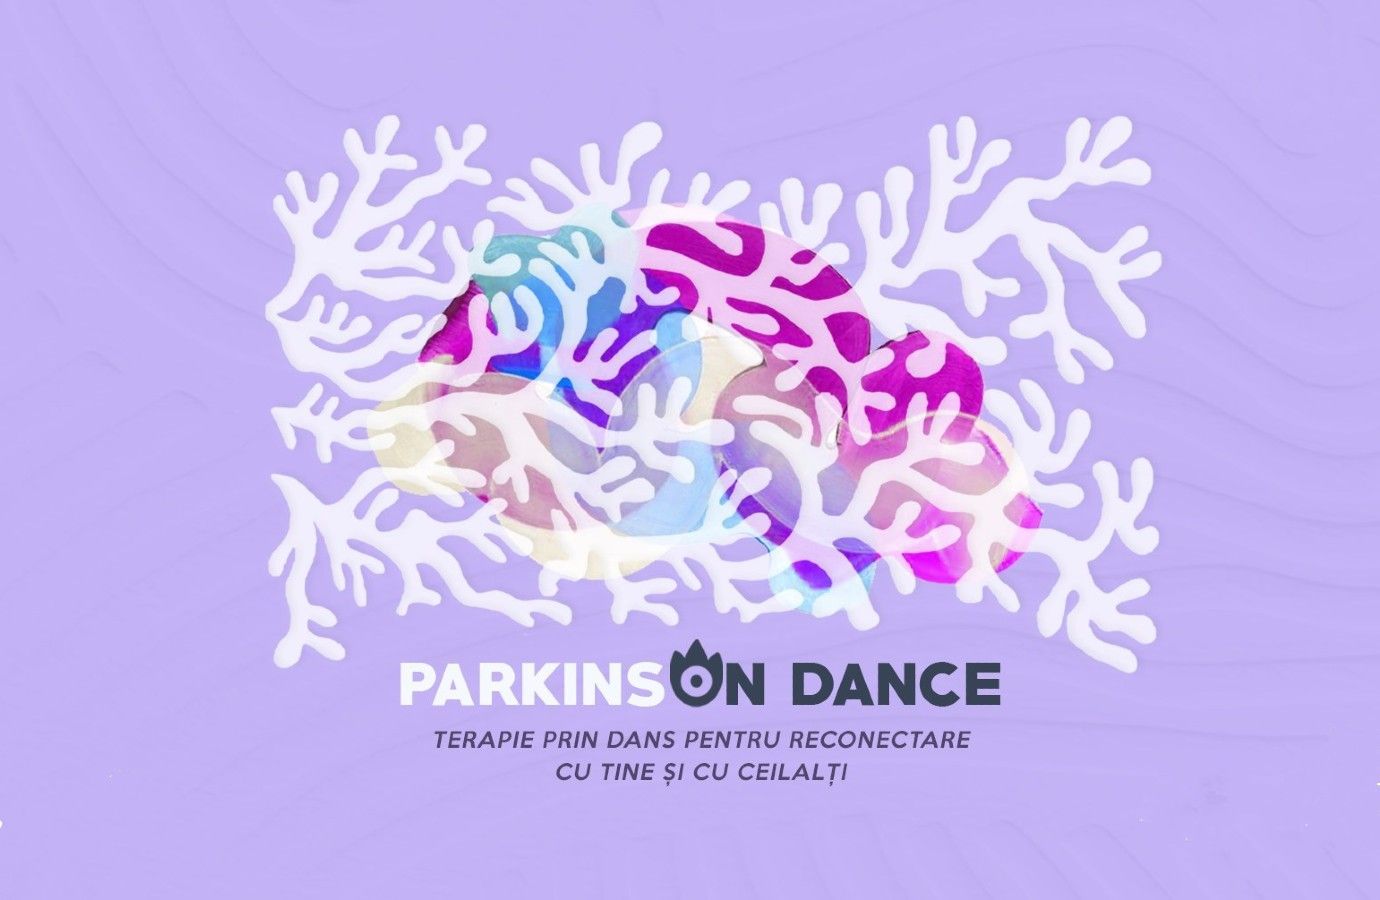 Learning Dance Therapy for Parkinson